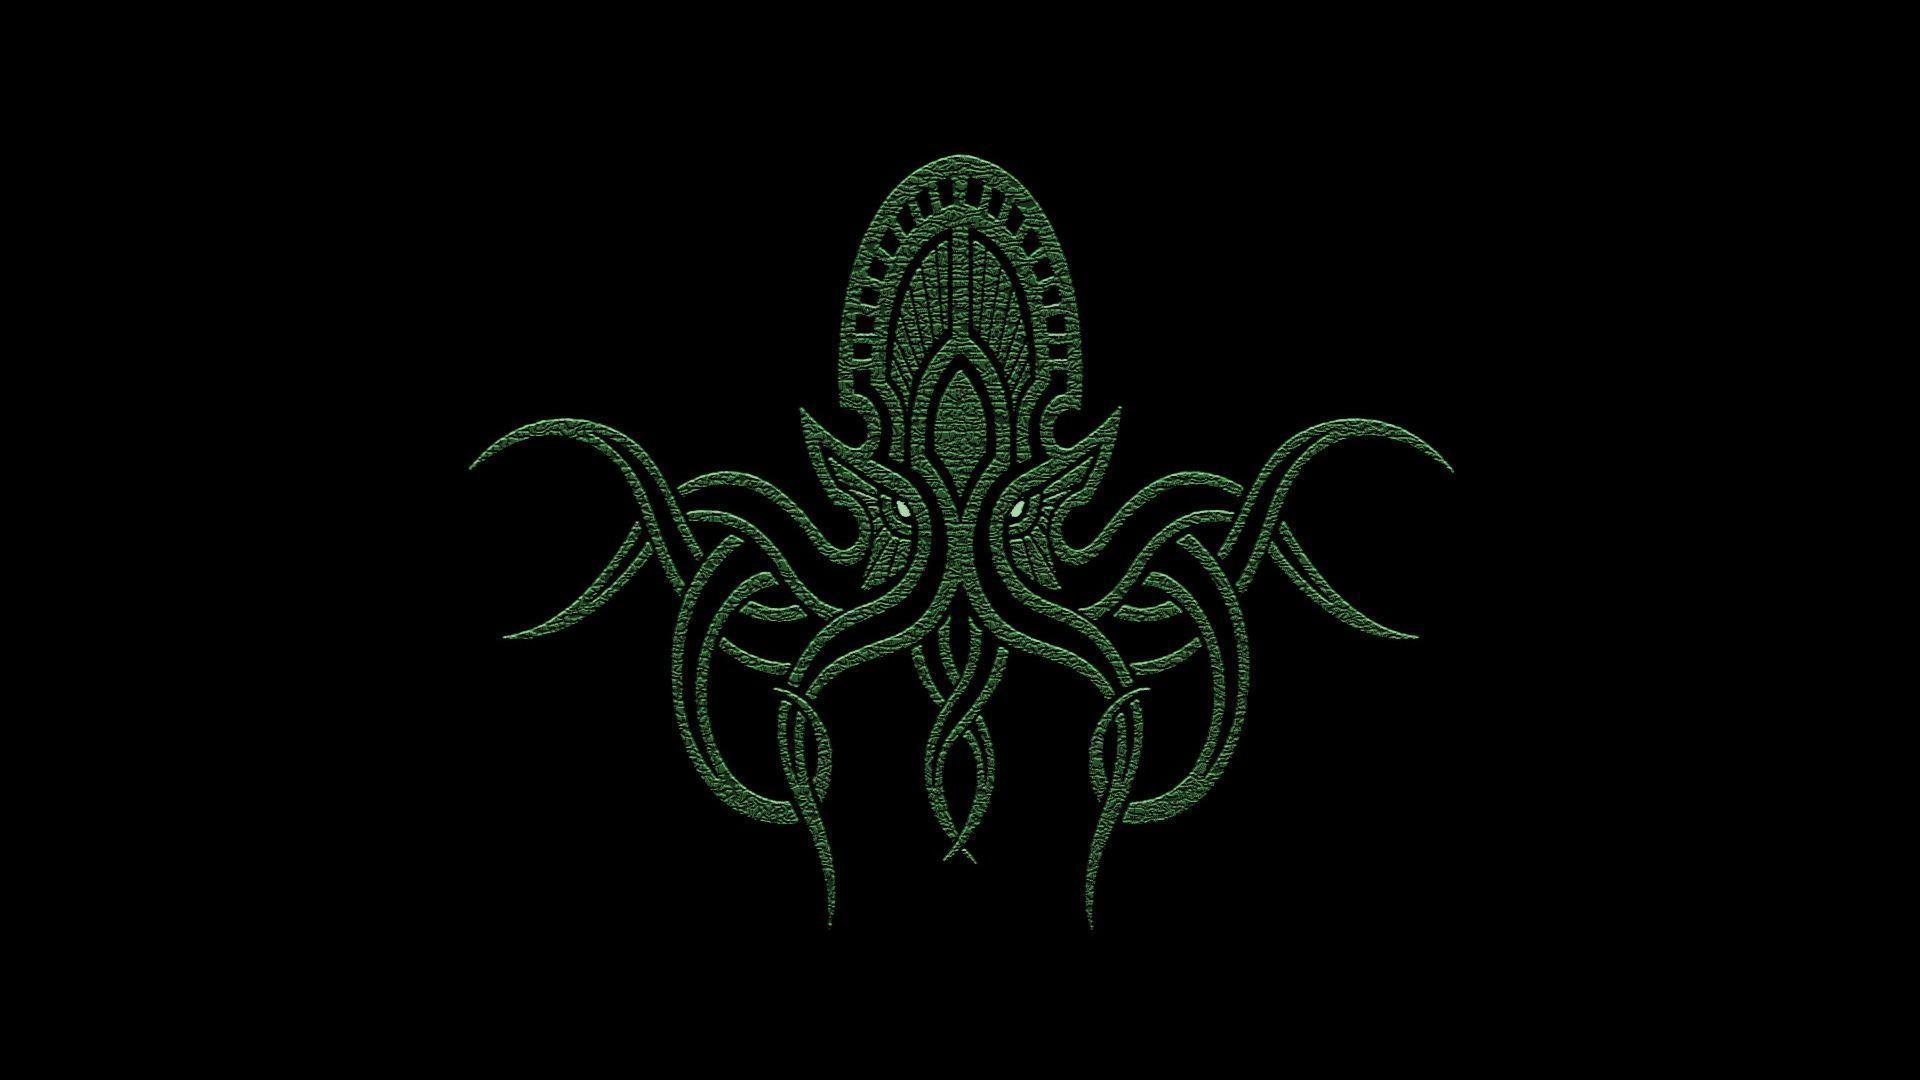 Free Download Cthulhu Wallpaper 2 Full Size